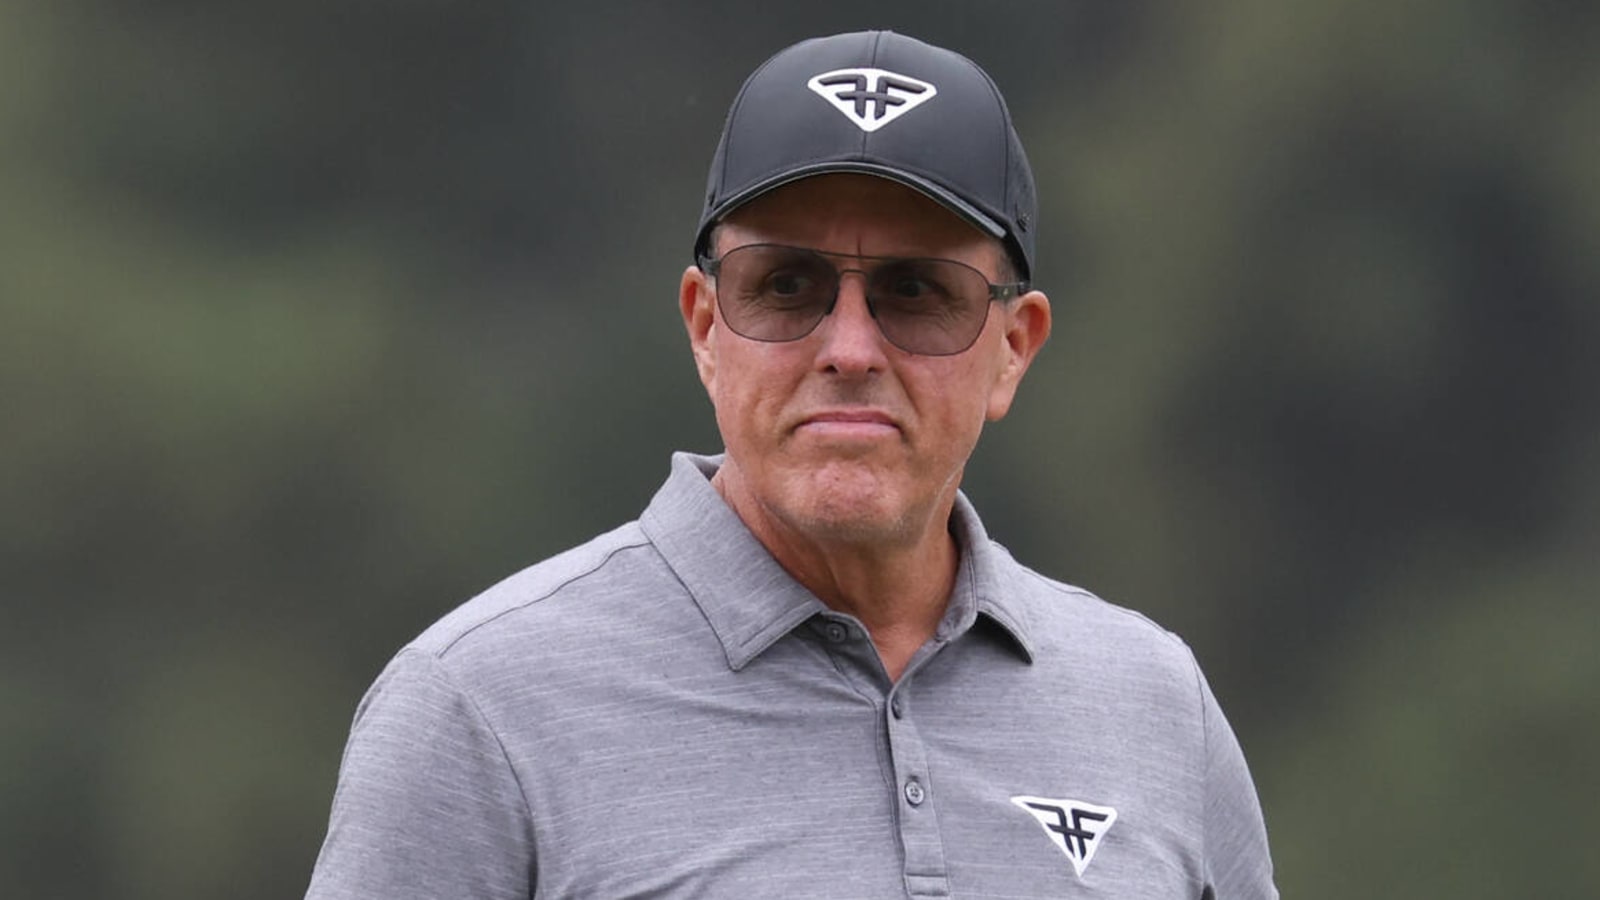 Phil Mickelson responds to allegation he bet $1B on sports